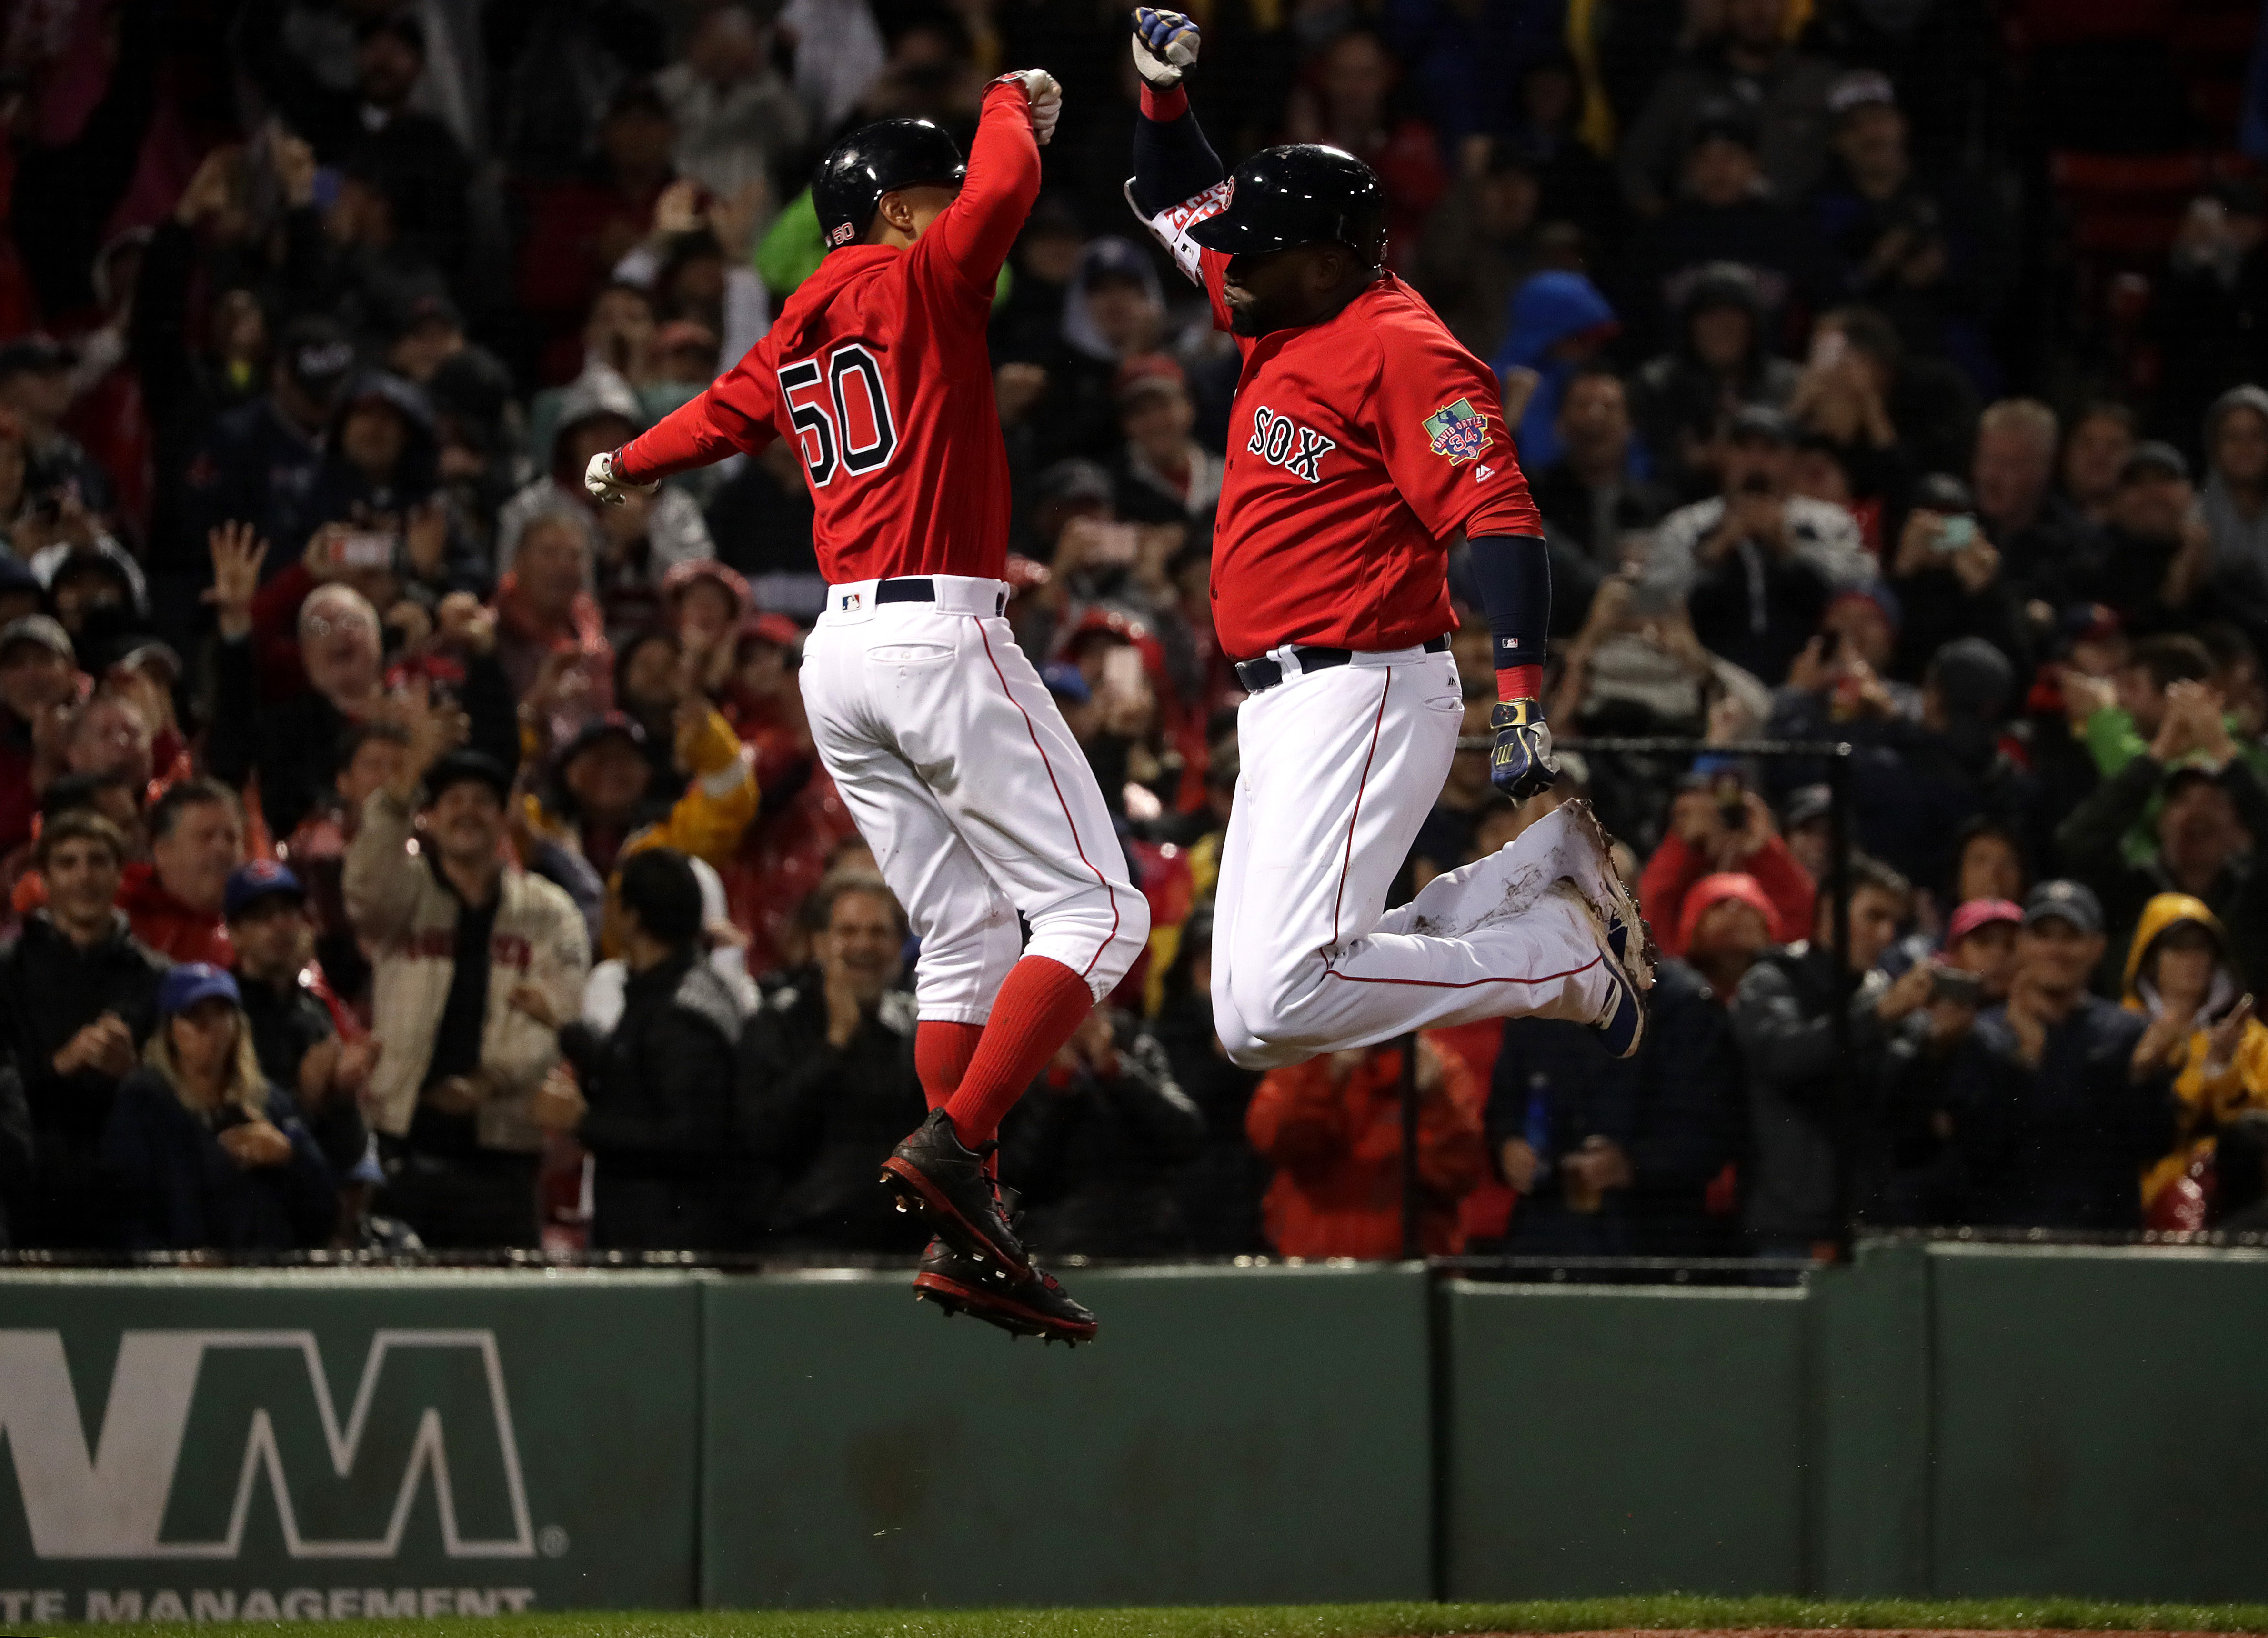 Ortiz celebrates his final home run with Mookie Betts during a Sept. 30 game against the Jays.